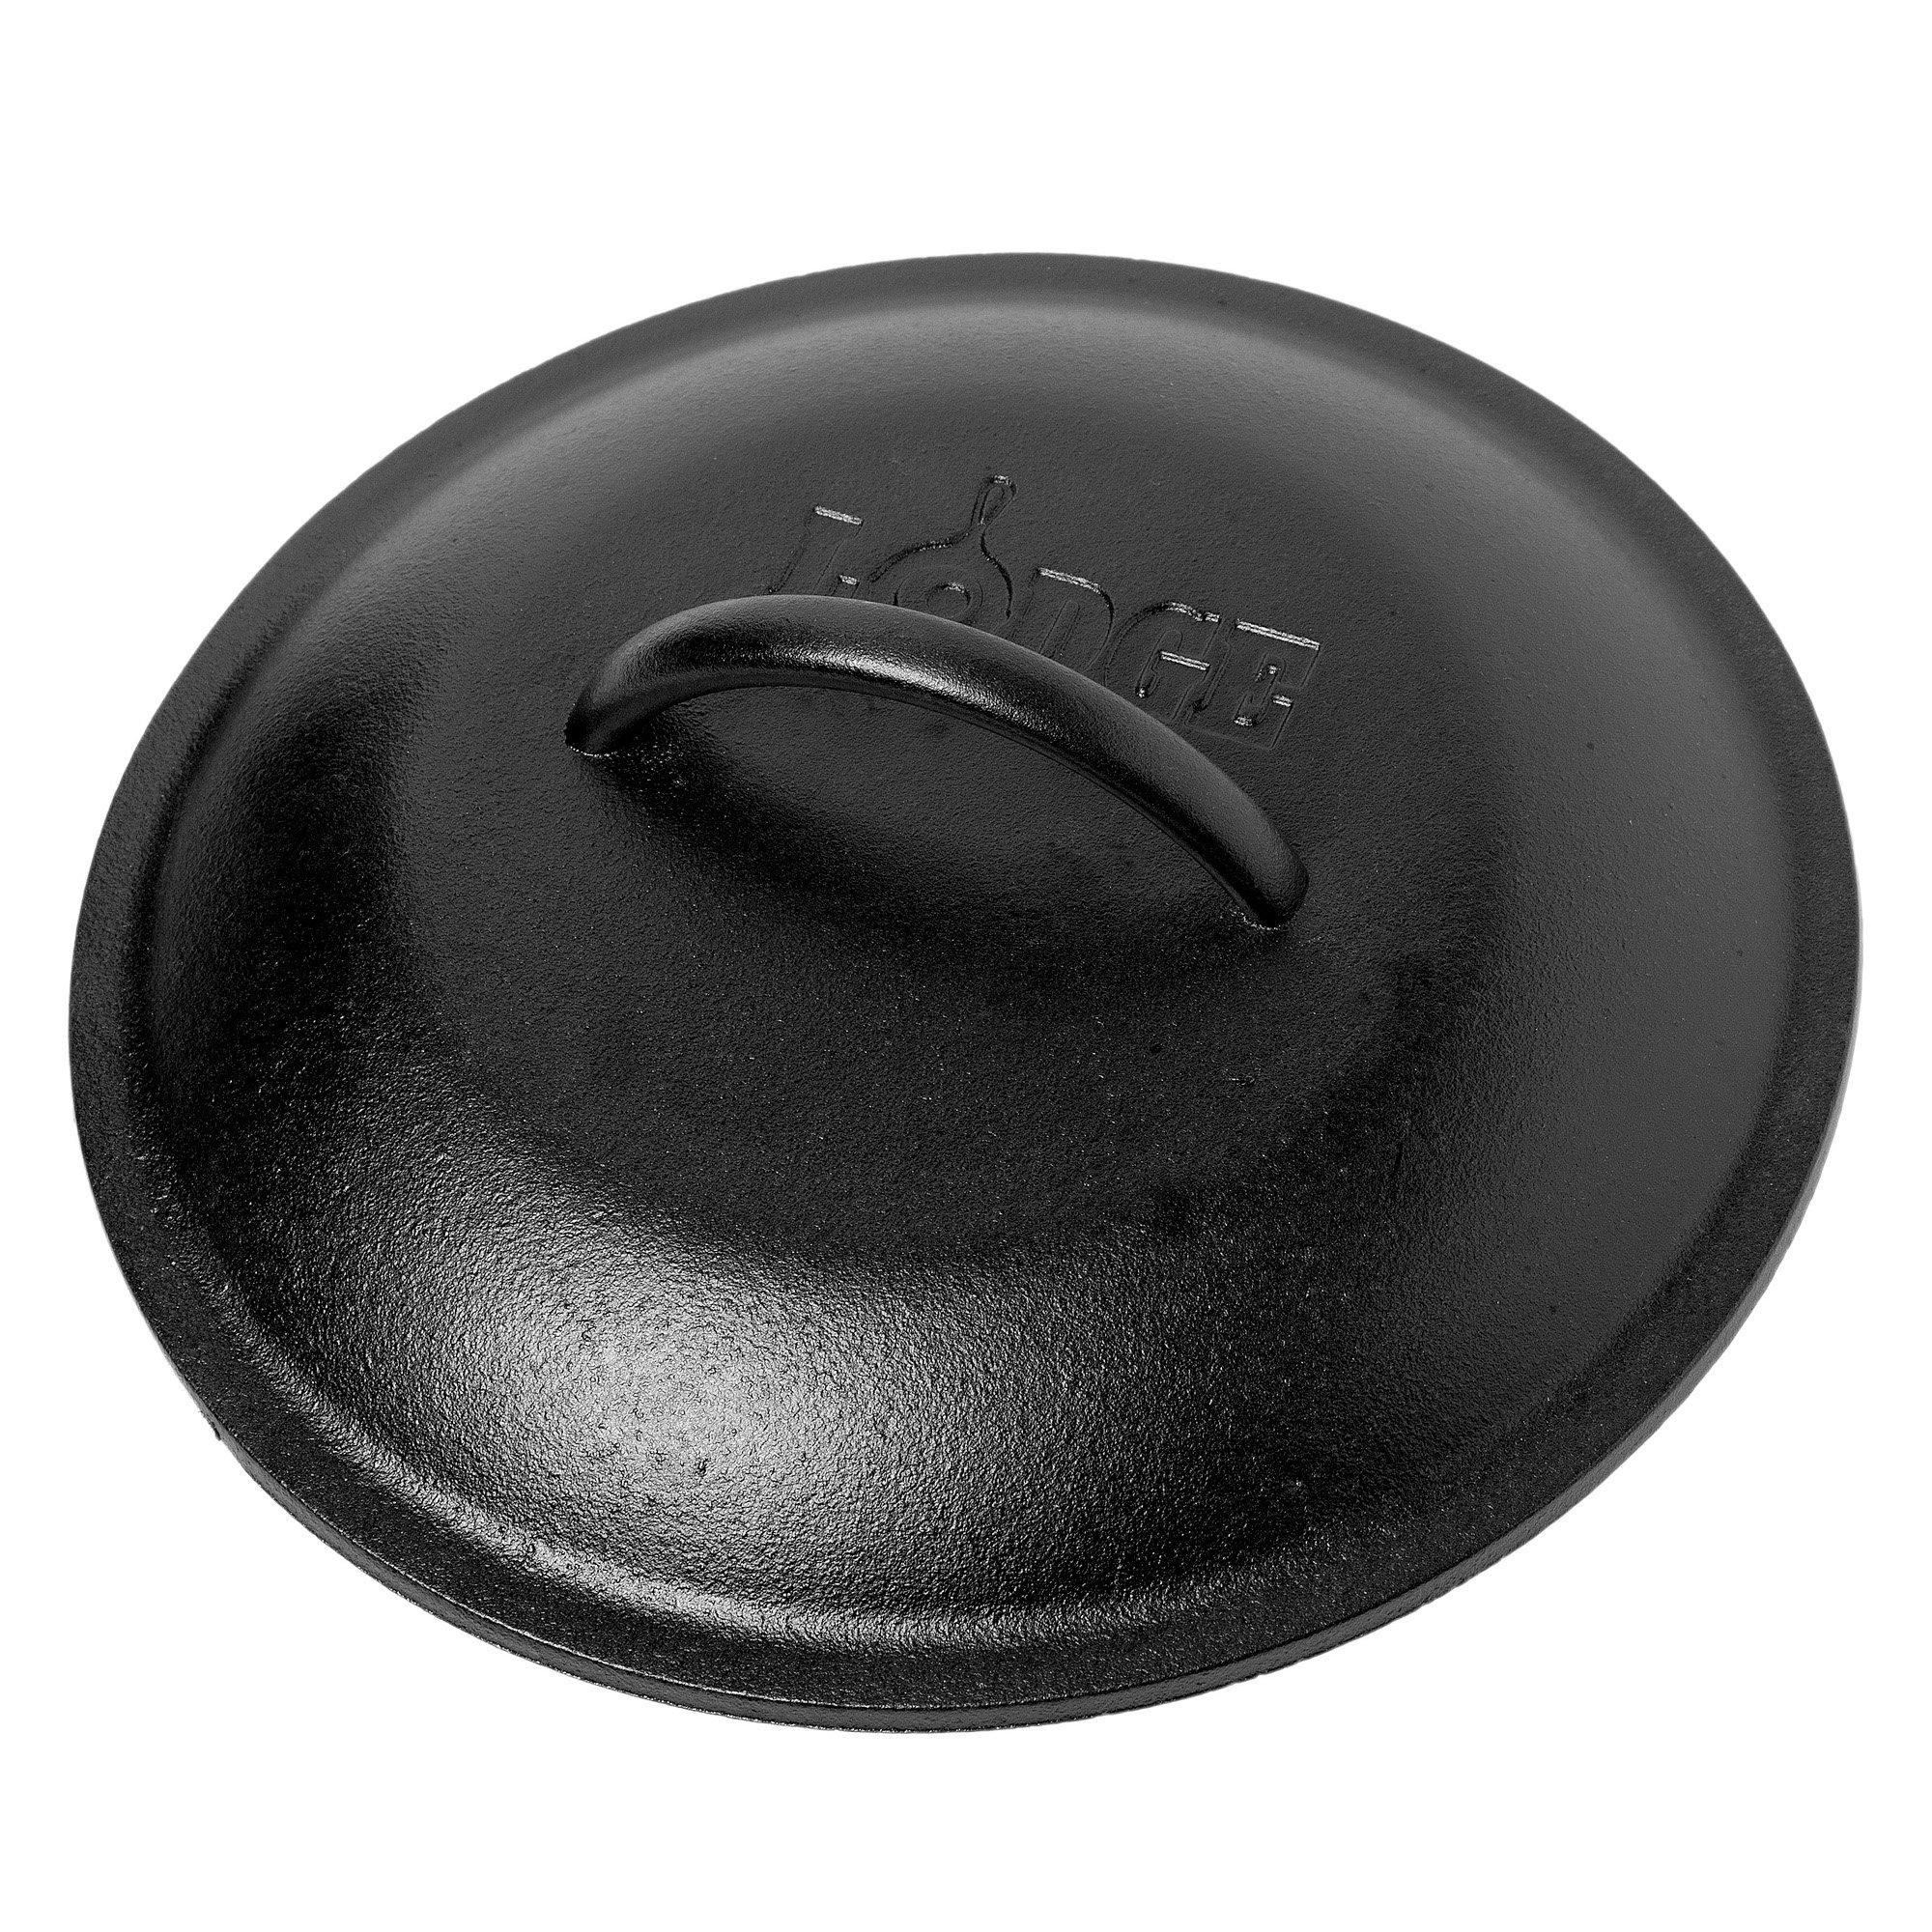 Lodge L10GPL 12 Pre-Seasoned Cast Iron Grill Pan with Dual Handles